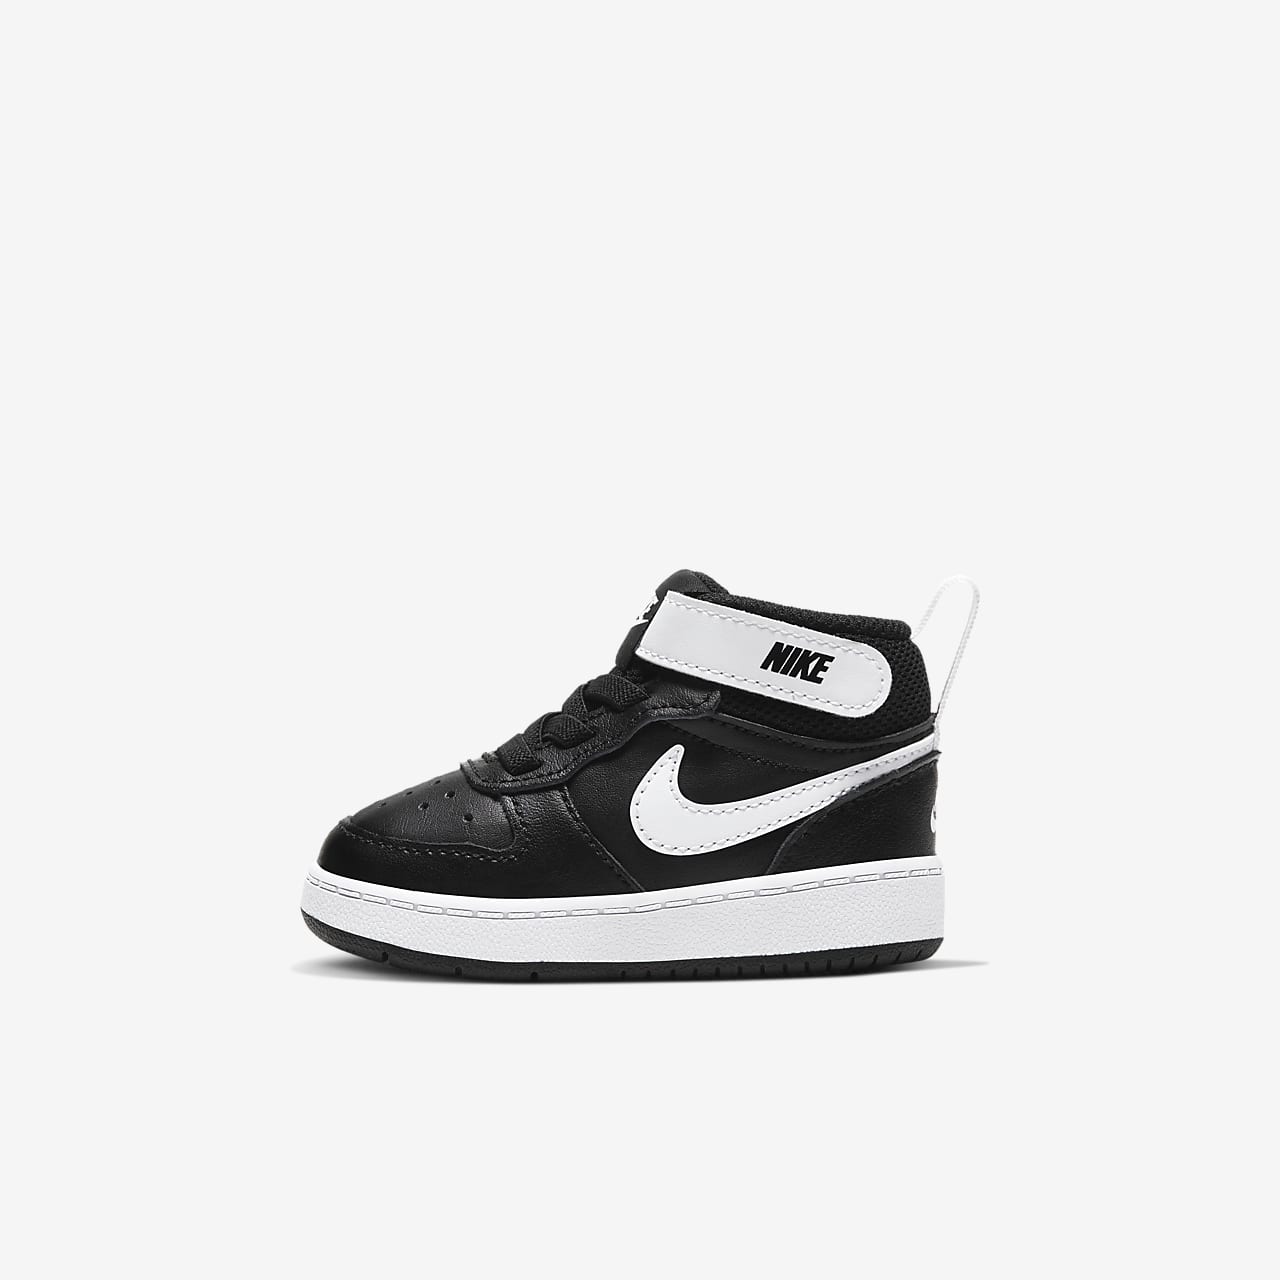 Nike Court Borough Mid 2 Baby/Toddler Shoes